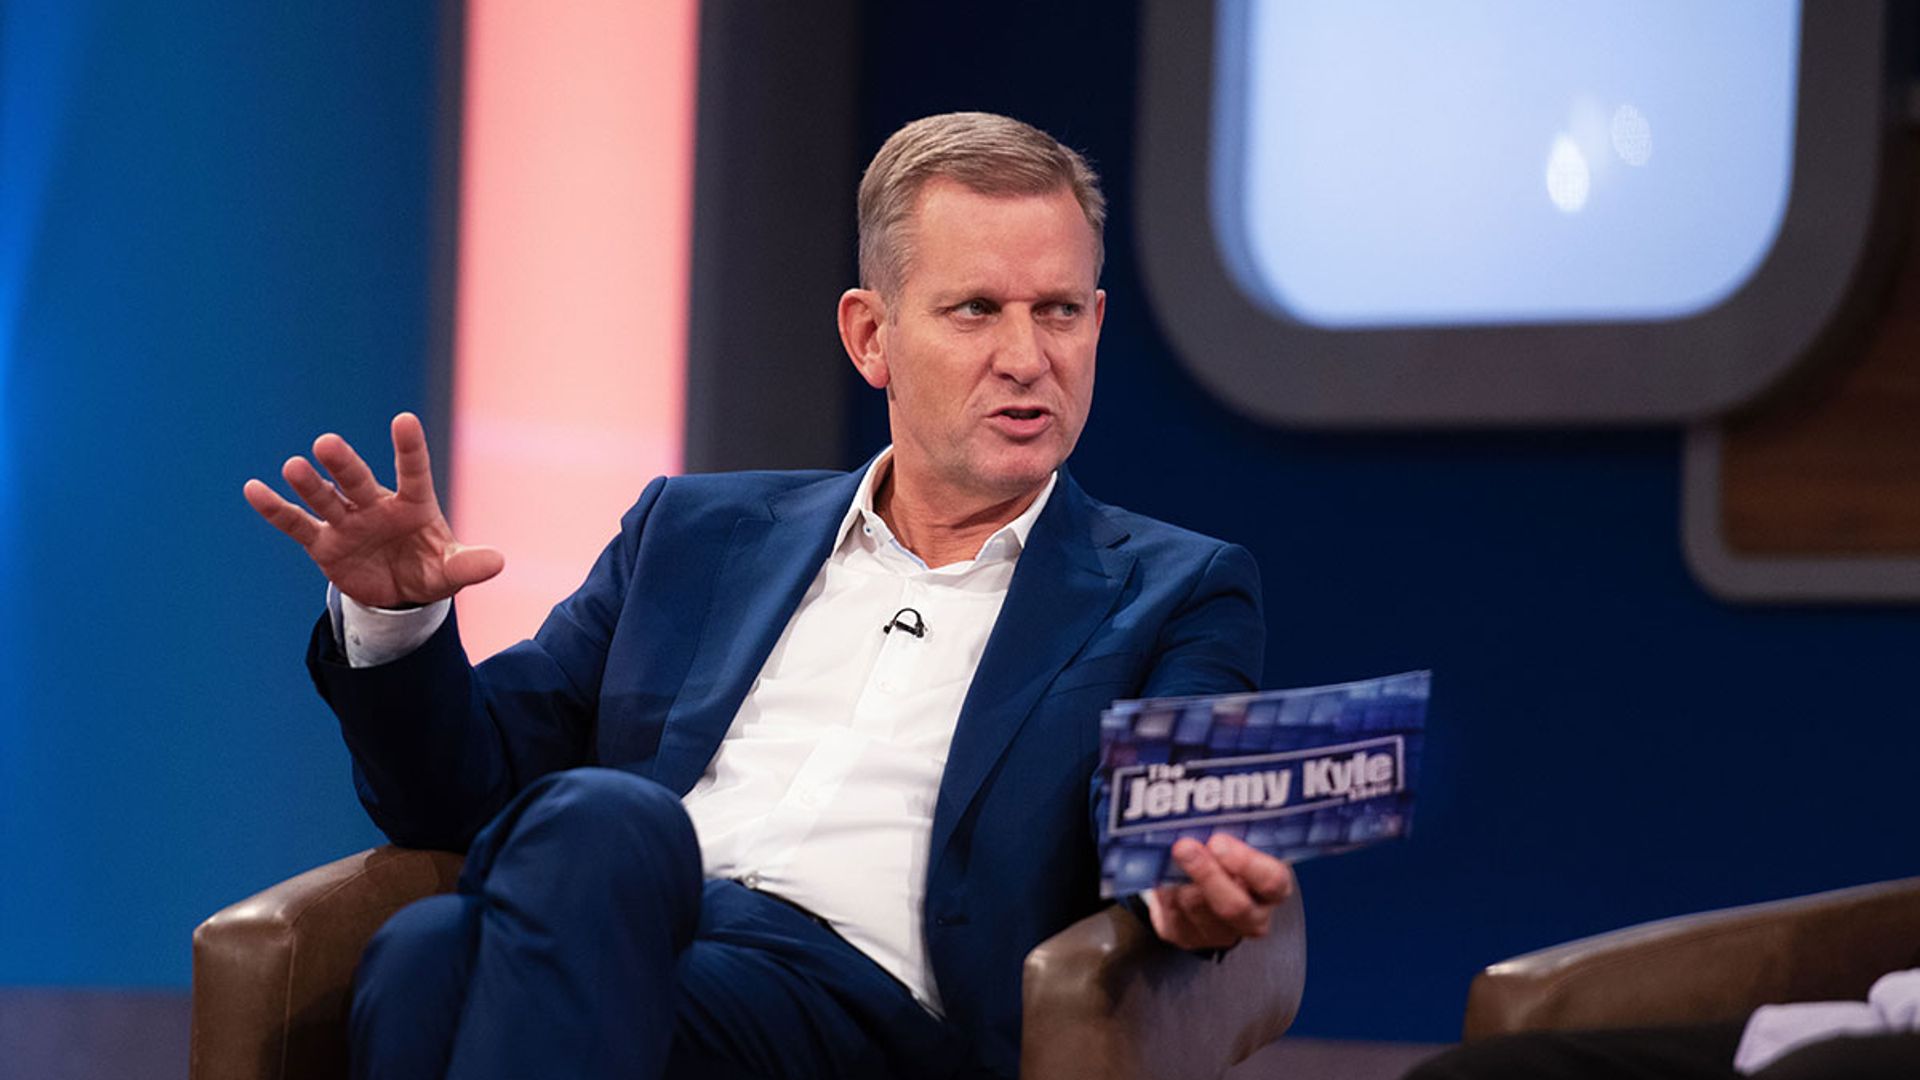 The Jeremy Kyle Show criticised after 'lie detector' proved not to be accurate